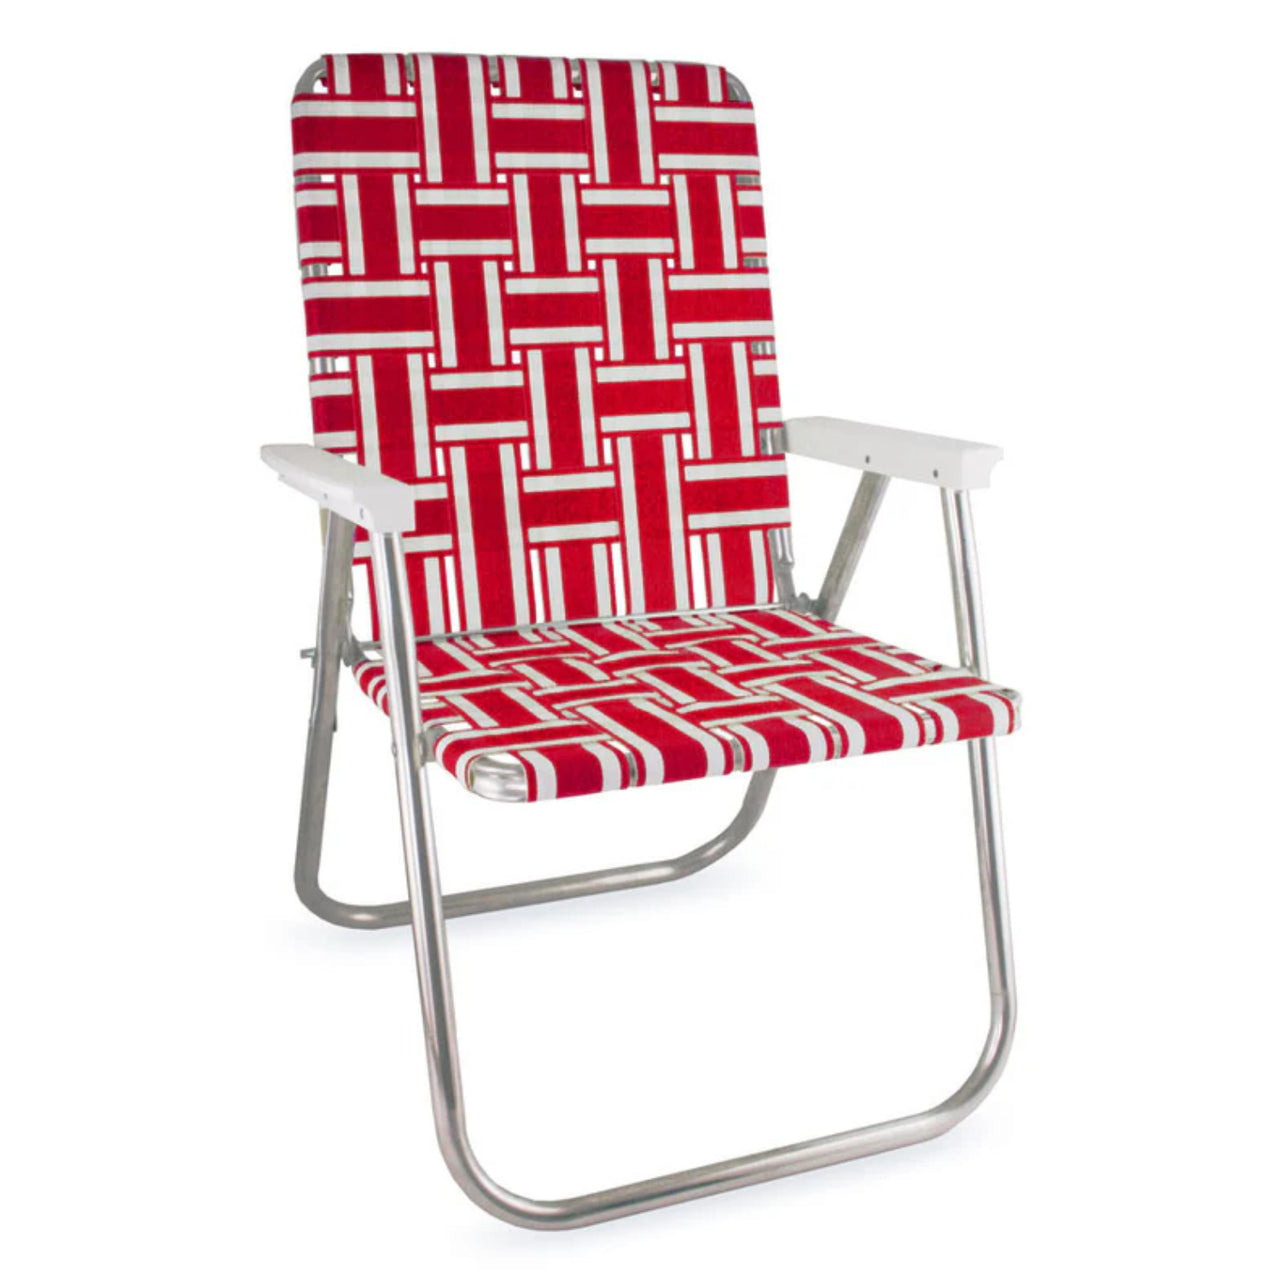 Lawn Chair | Red Stripe Deluxe